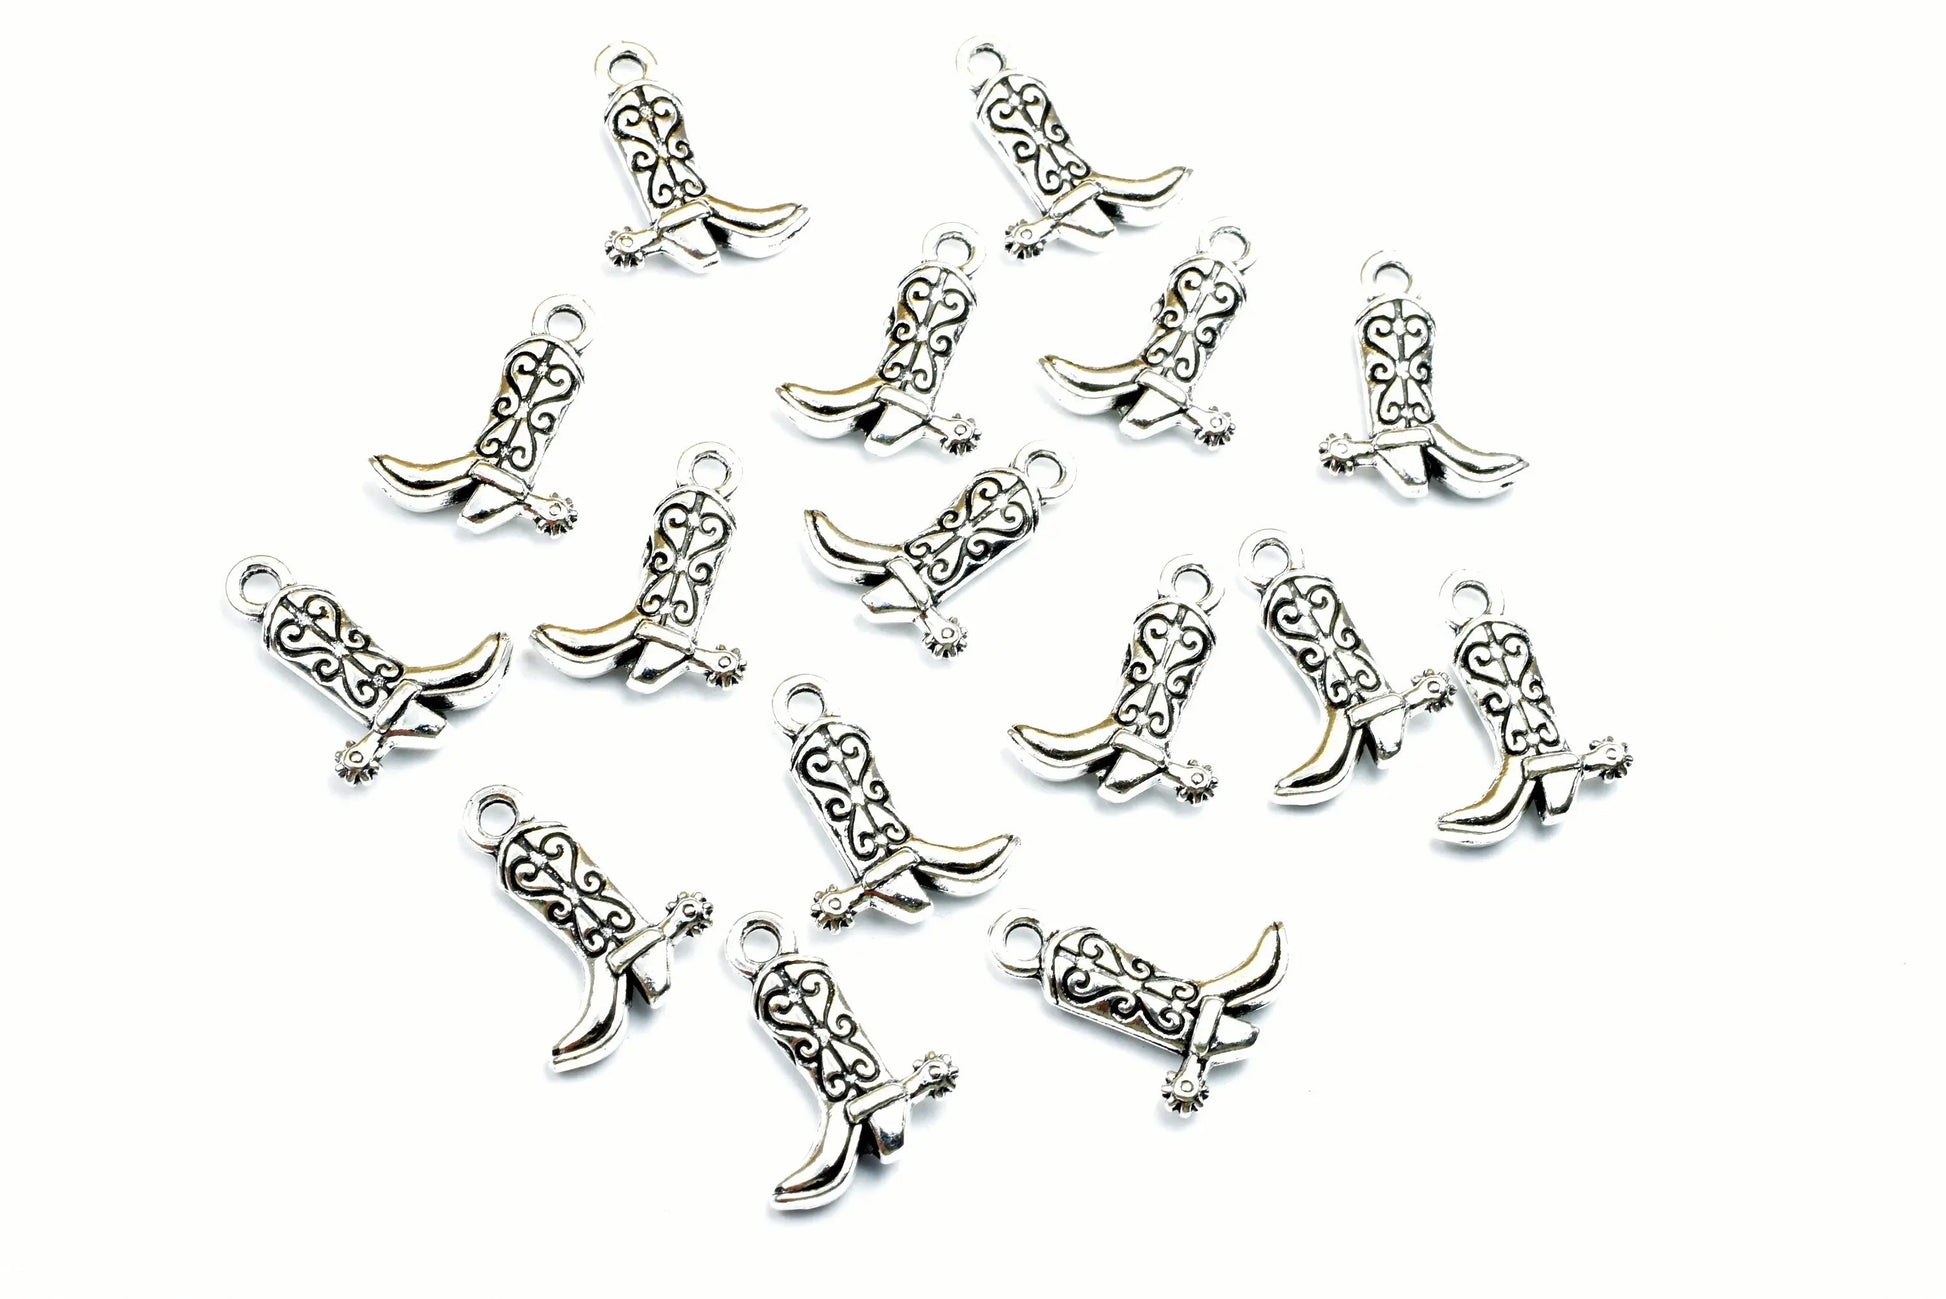 Cowboy Boots Charm Pendant Beads Silver Size 17x13mm Decorative Design Metal Double Face Finding Beads for Jewelry Making 14PCs/PK - BeadsFindingDepot